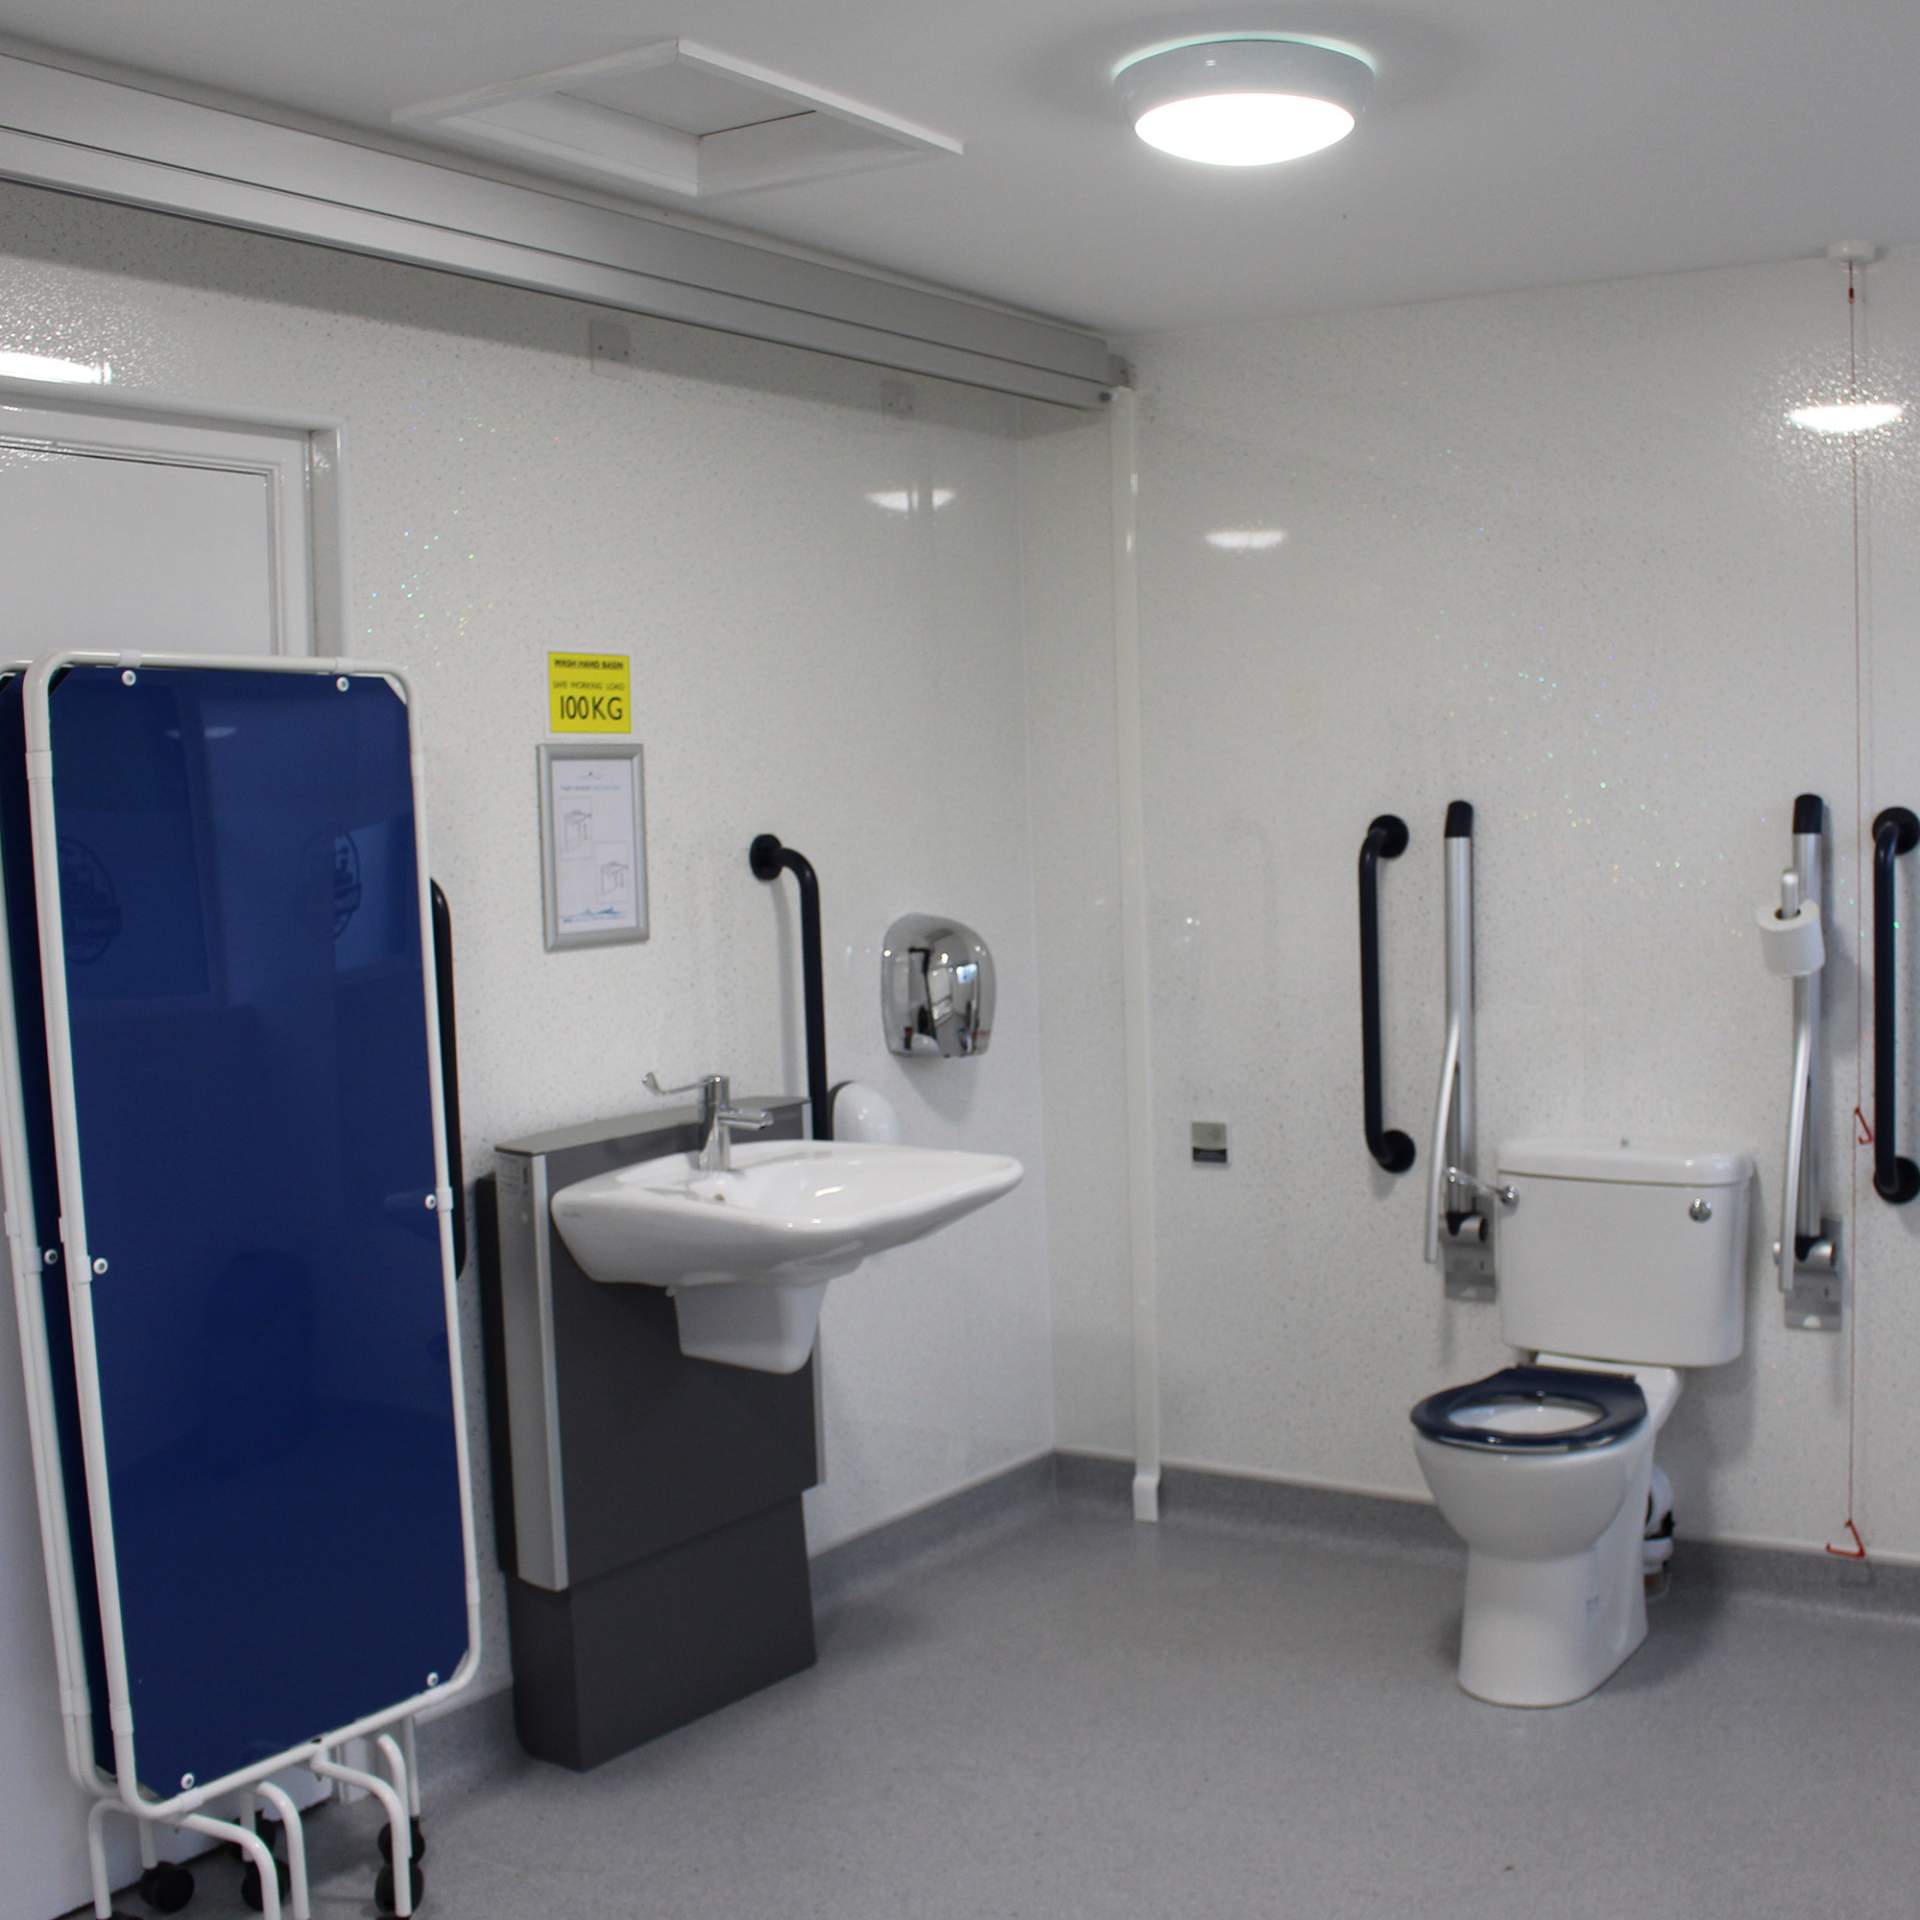 Changingplaces